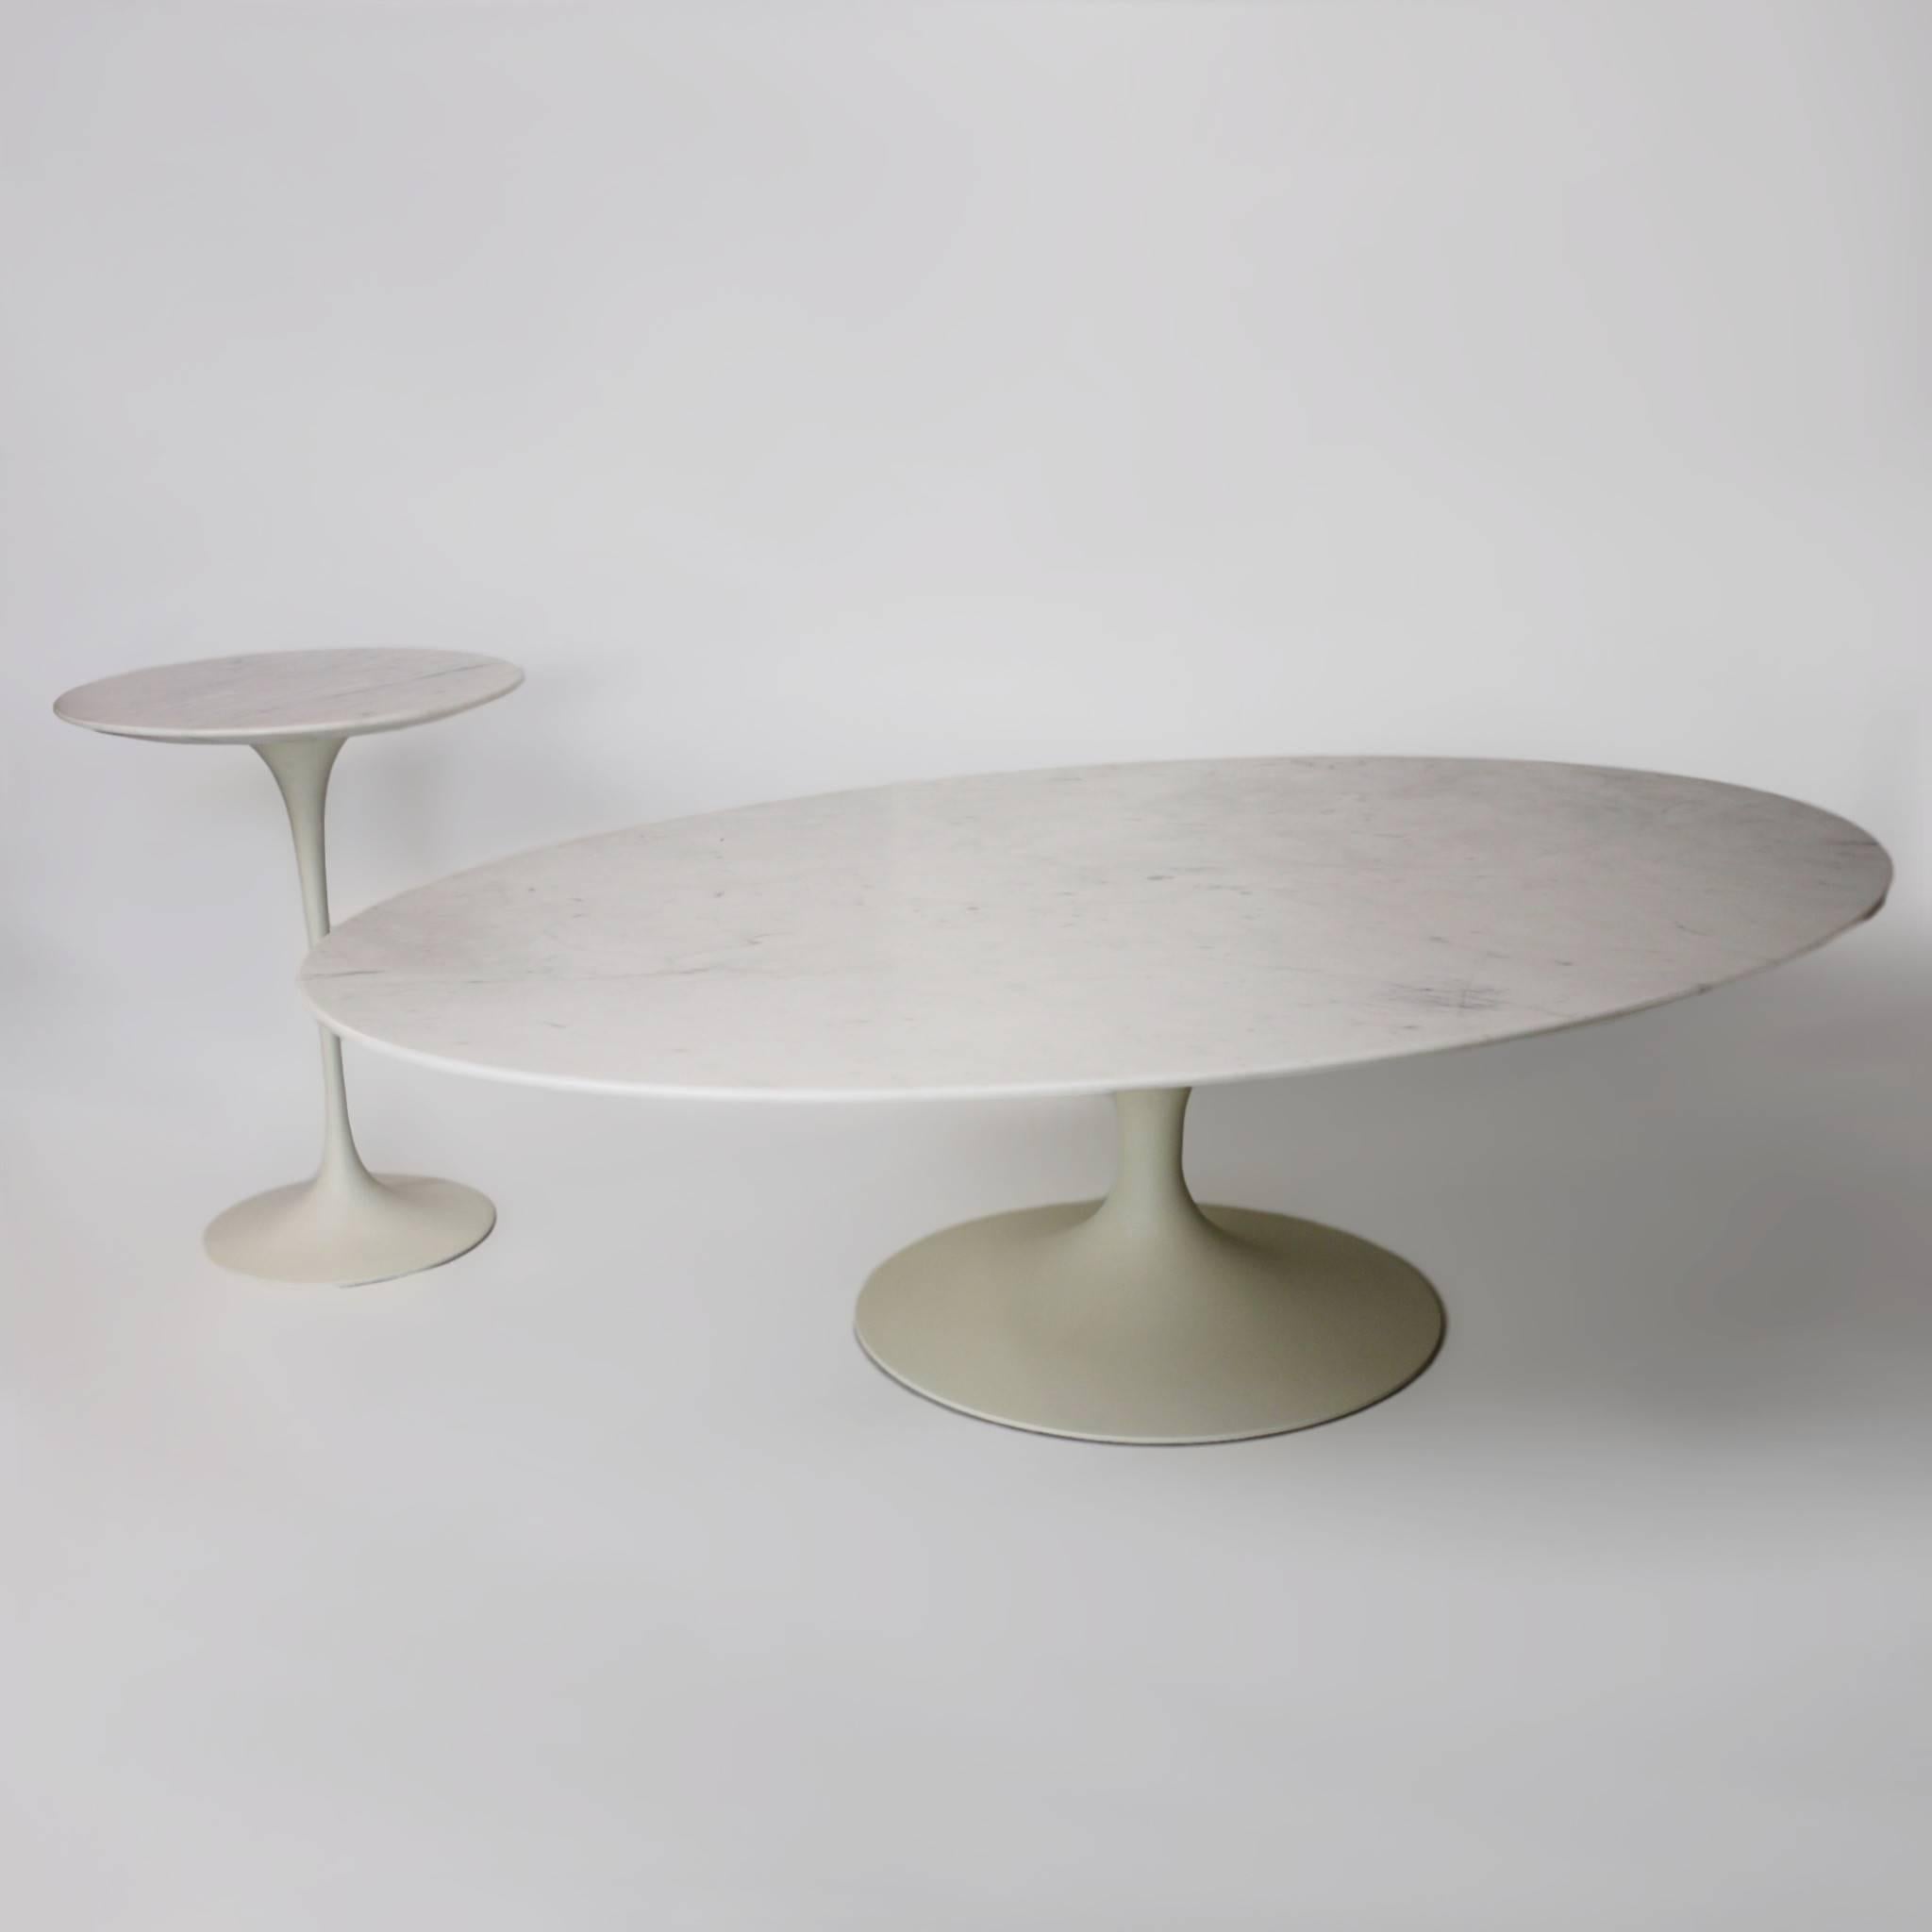 This is a spectacular, matching pair of tables by the renowned designer Eero Saarinen for Knoll. These tables represent the first-run of tables produced between 1957 and 1961. Tables feature the early cast-iron bases (later bases were aluminium) and